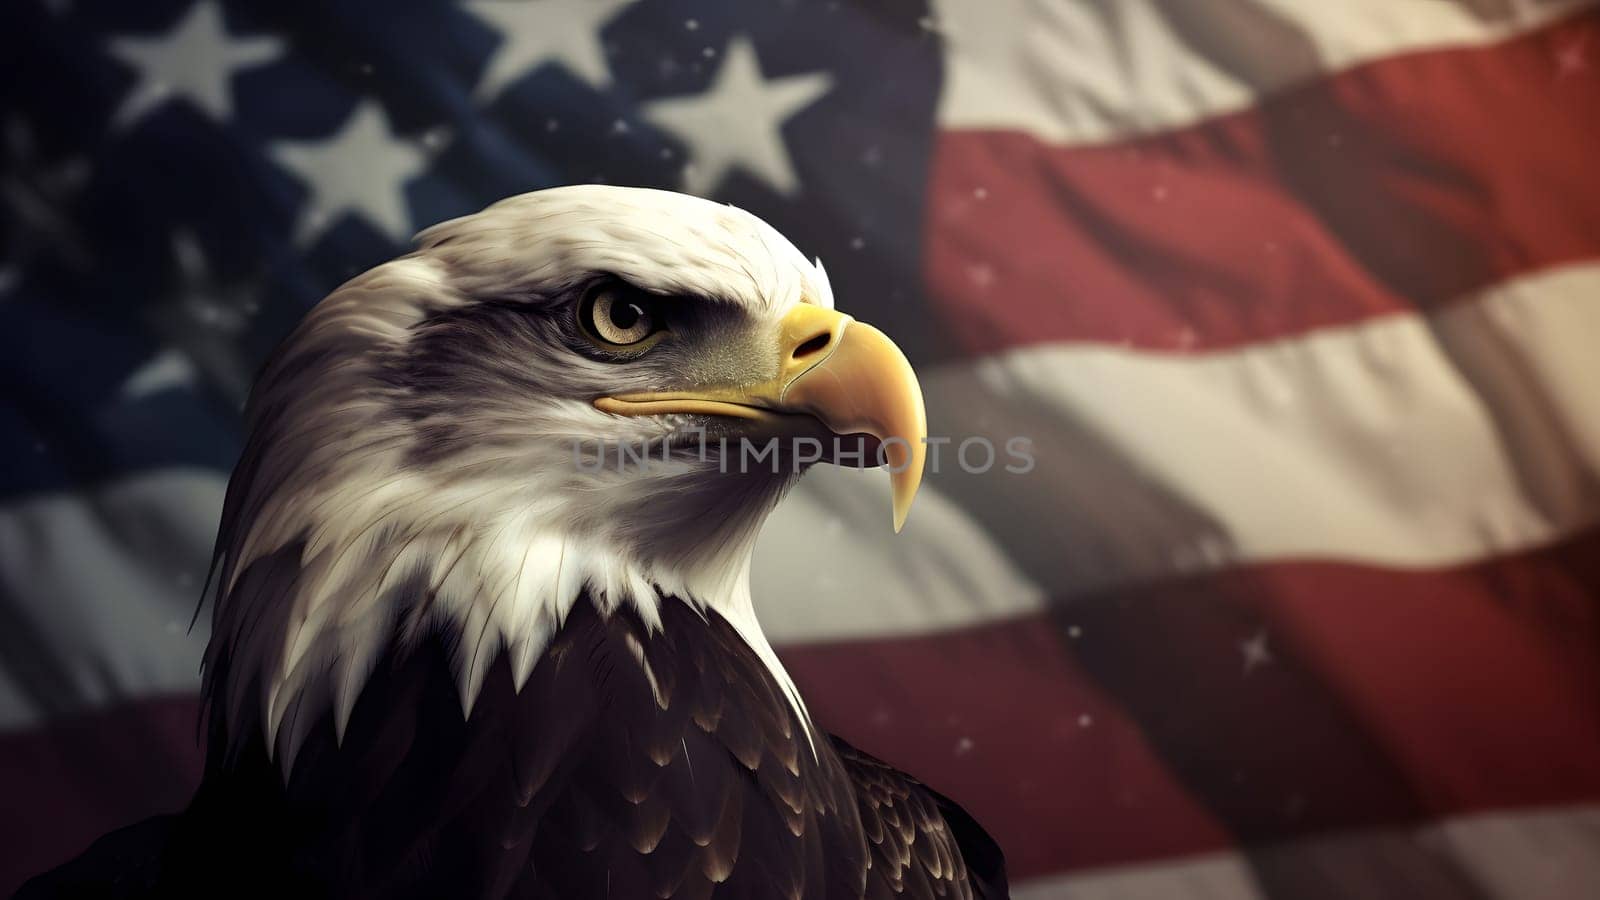 North American Bald Eagle on American flag background, neural network generated photorealistic image by z1b